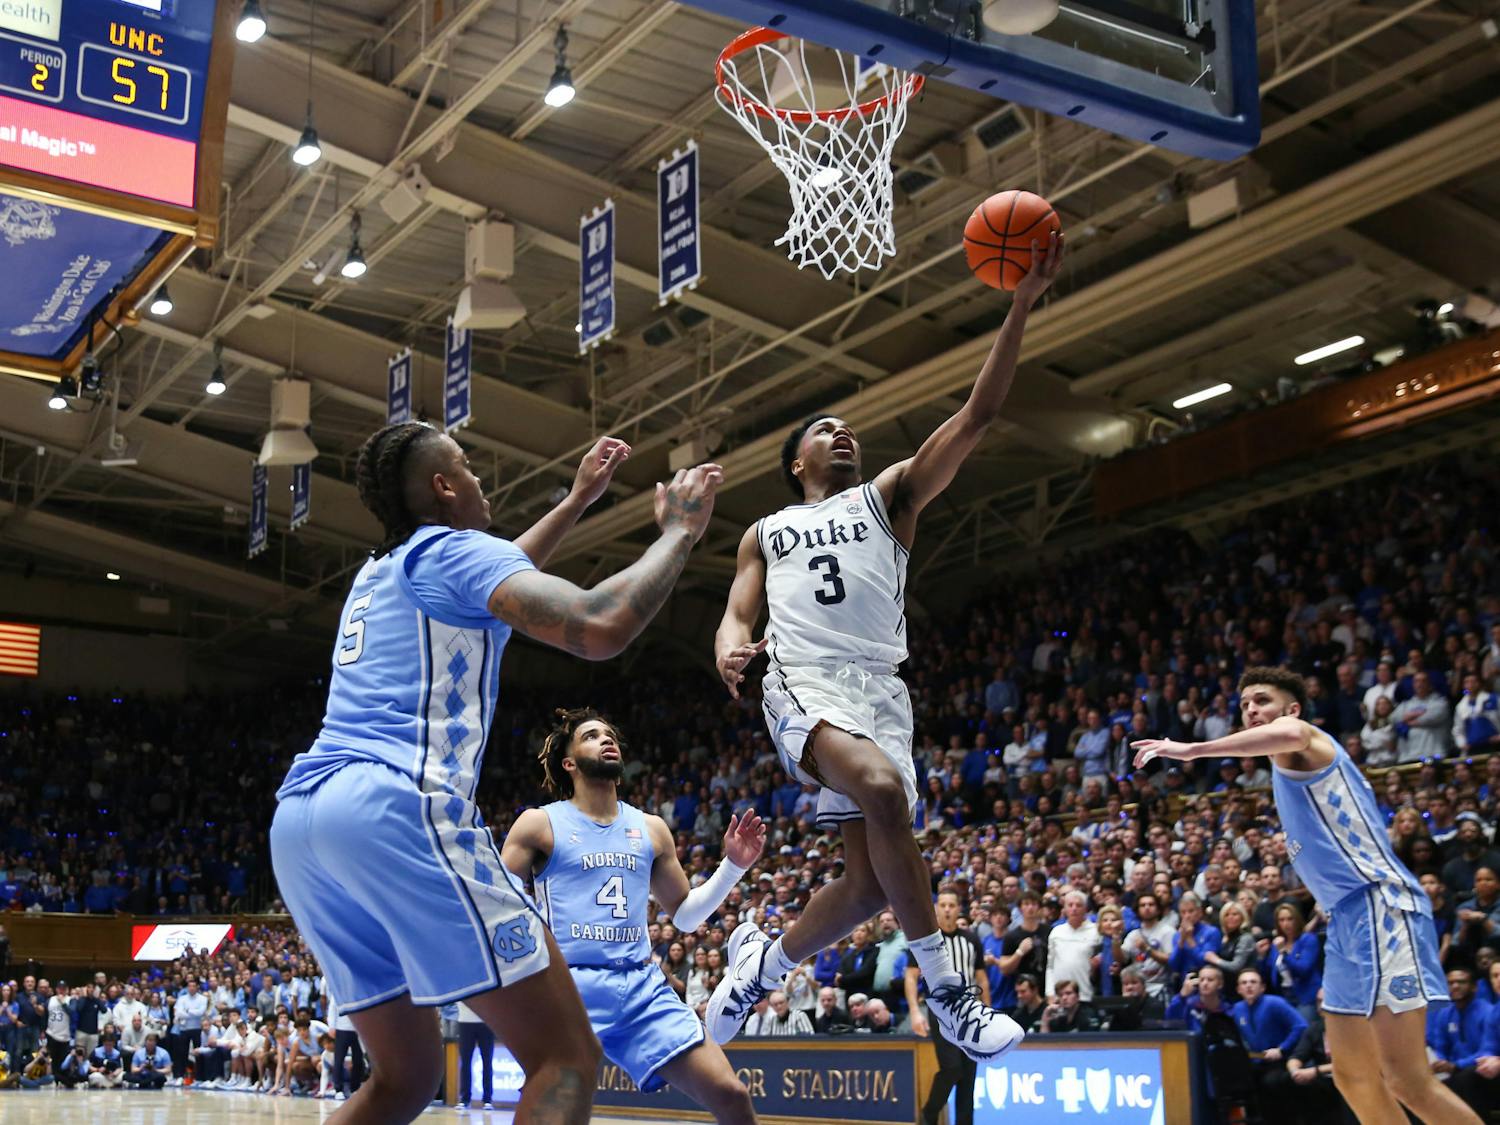 Jeremy Roach drives through traffic in last year's win against North Carolina in Cameron Indoor Stadium.